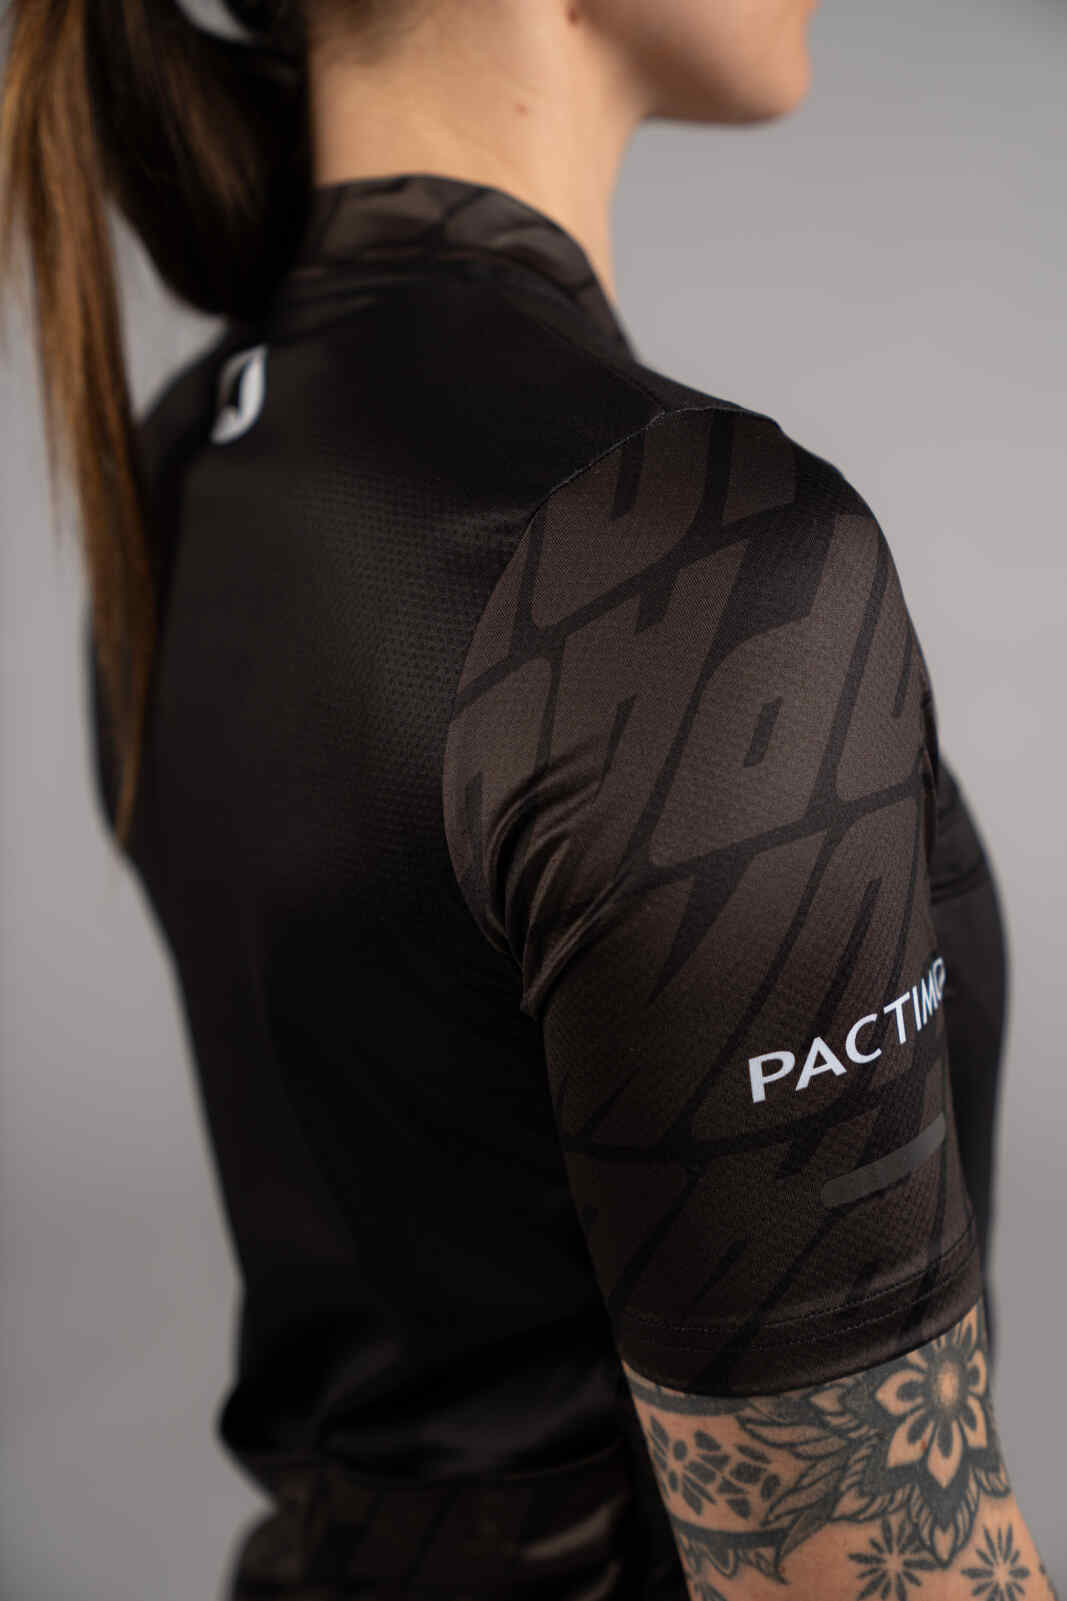 Women's Black Ascent Cycling Jersey - Sleeve Fabric Close-Up